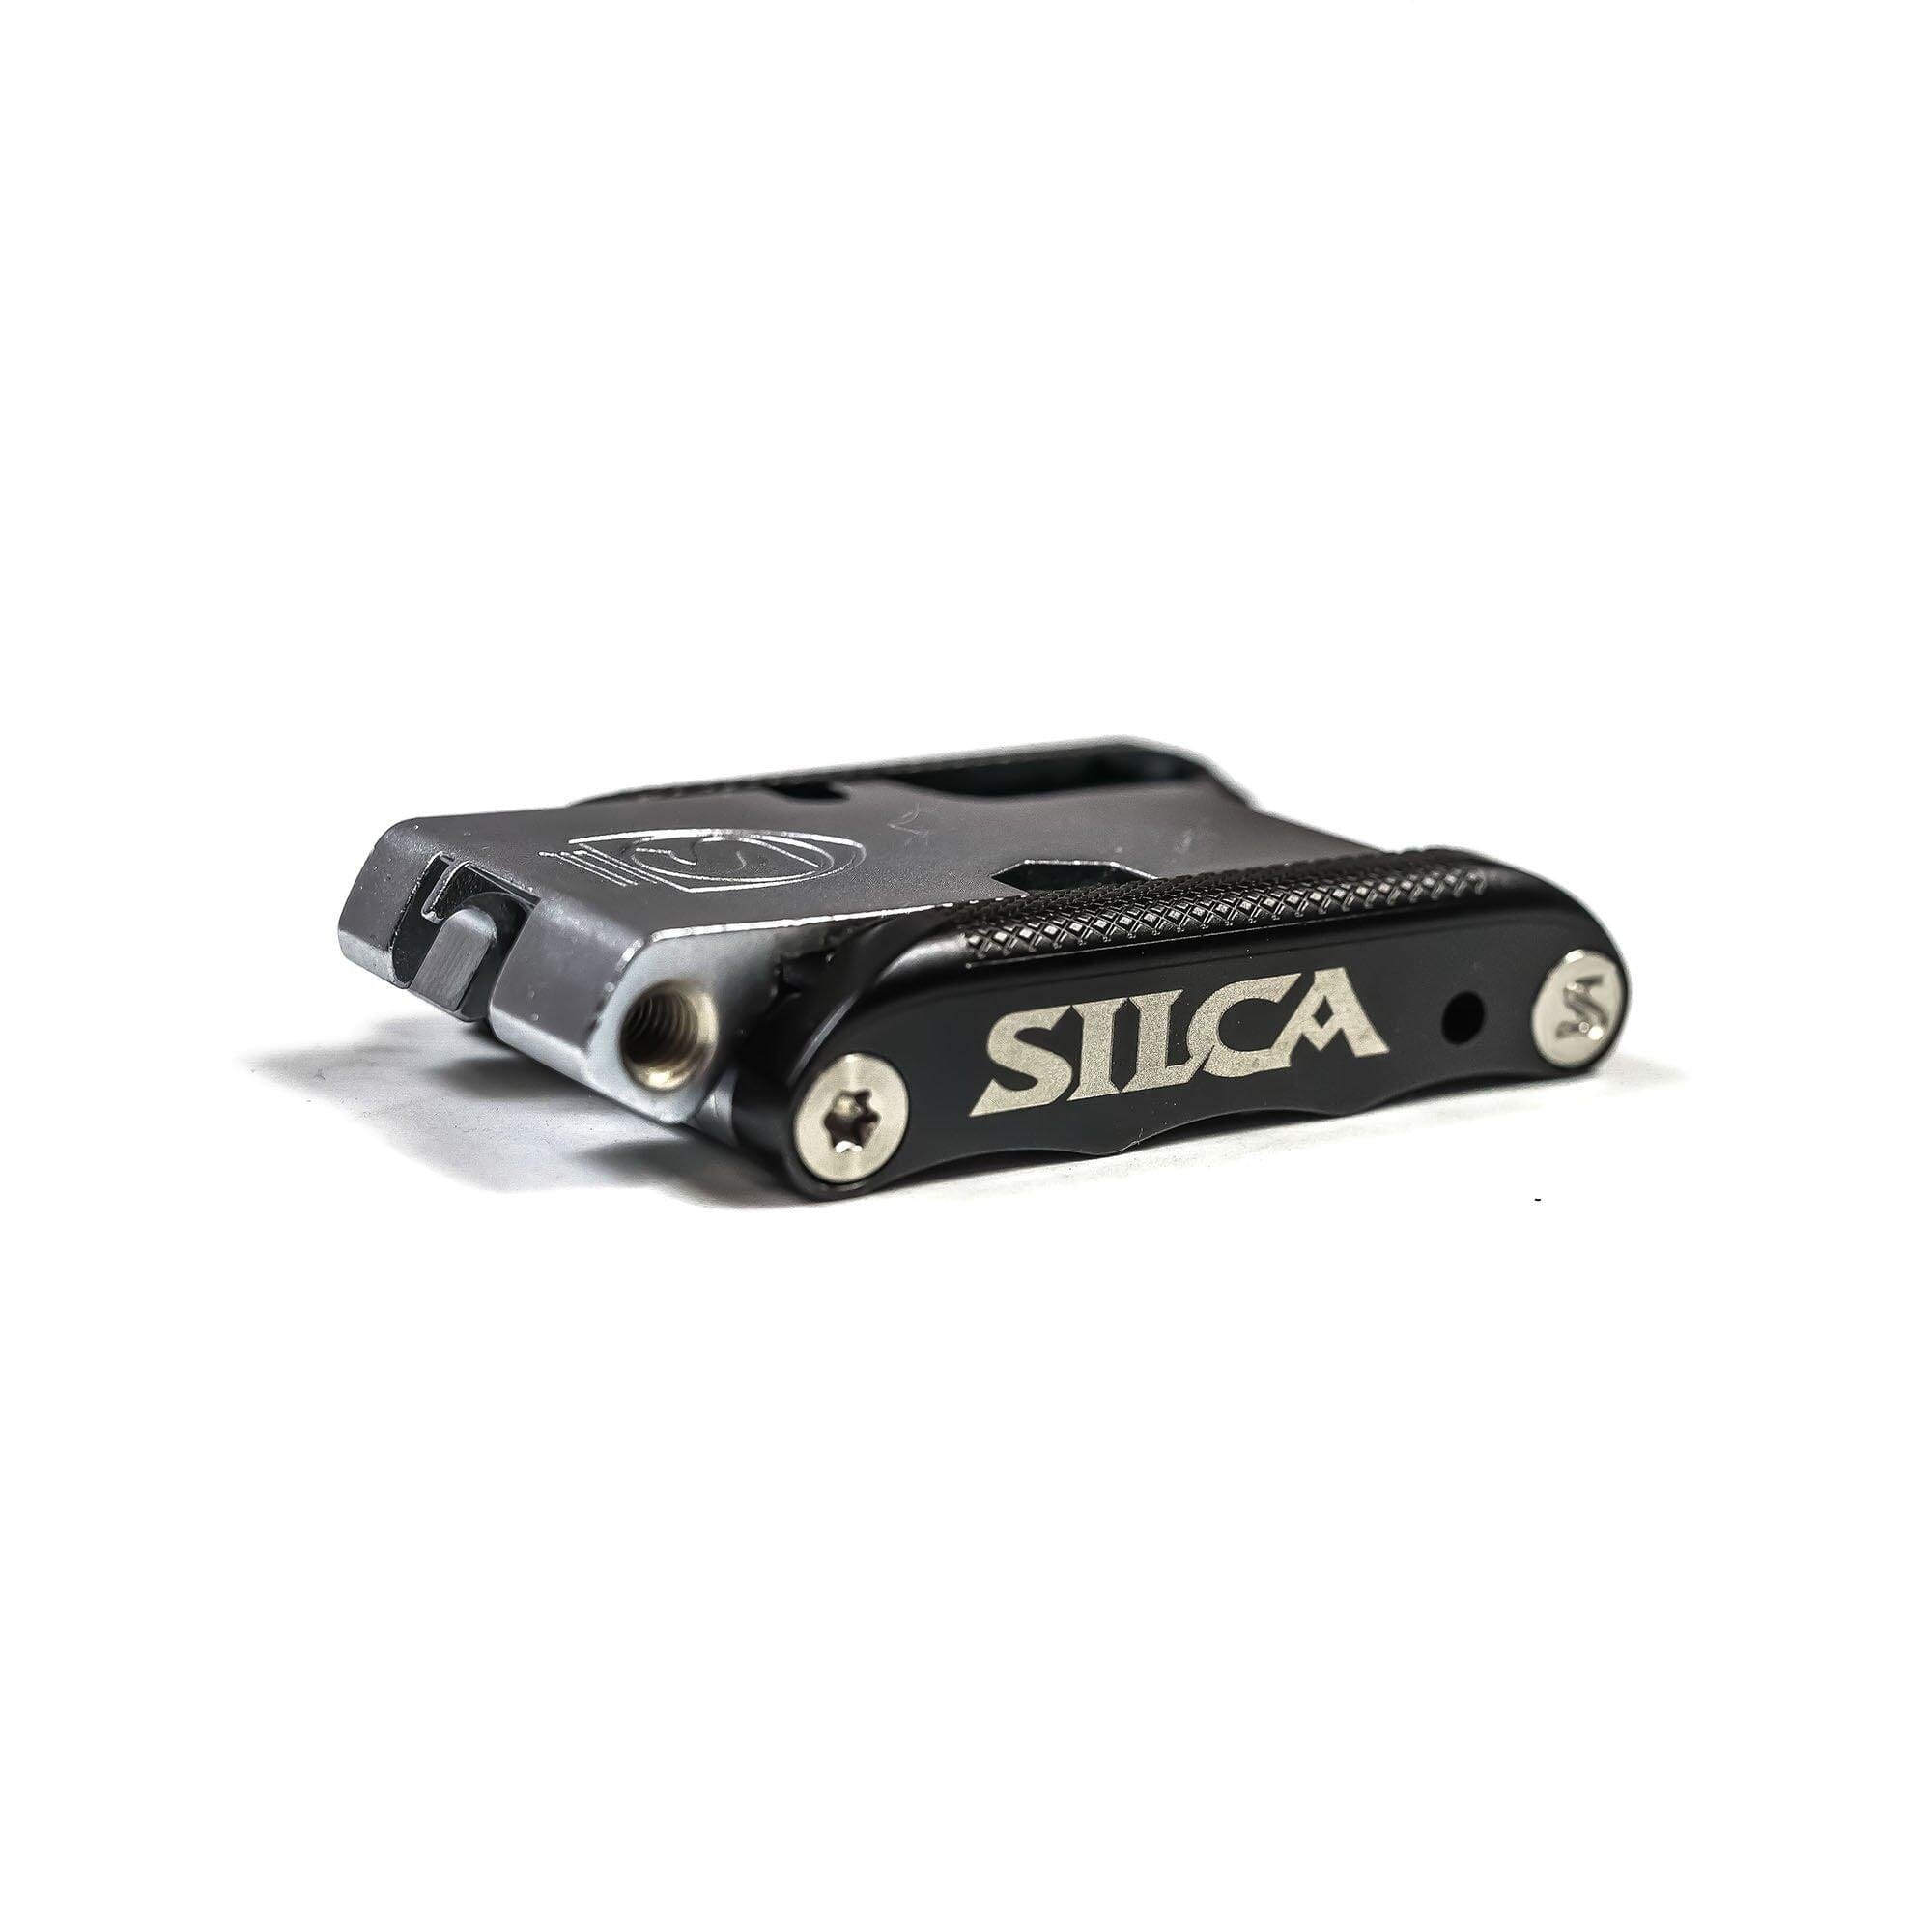 Silca Italian Army Knife Multi Tool Venti 20 Tools TOOLS (HOME MAINTAINENCE) Melbourne Powered Electric Bikes 